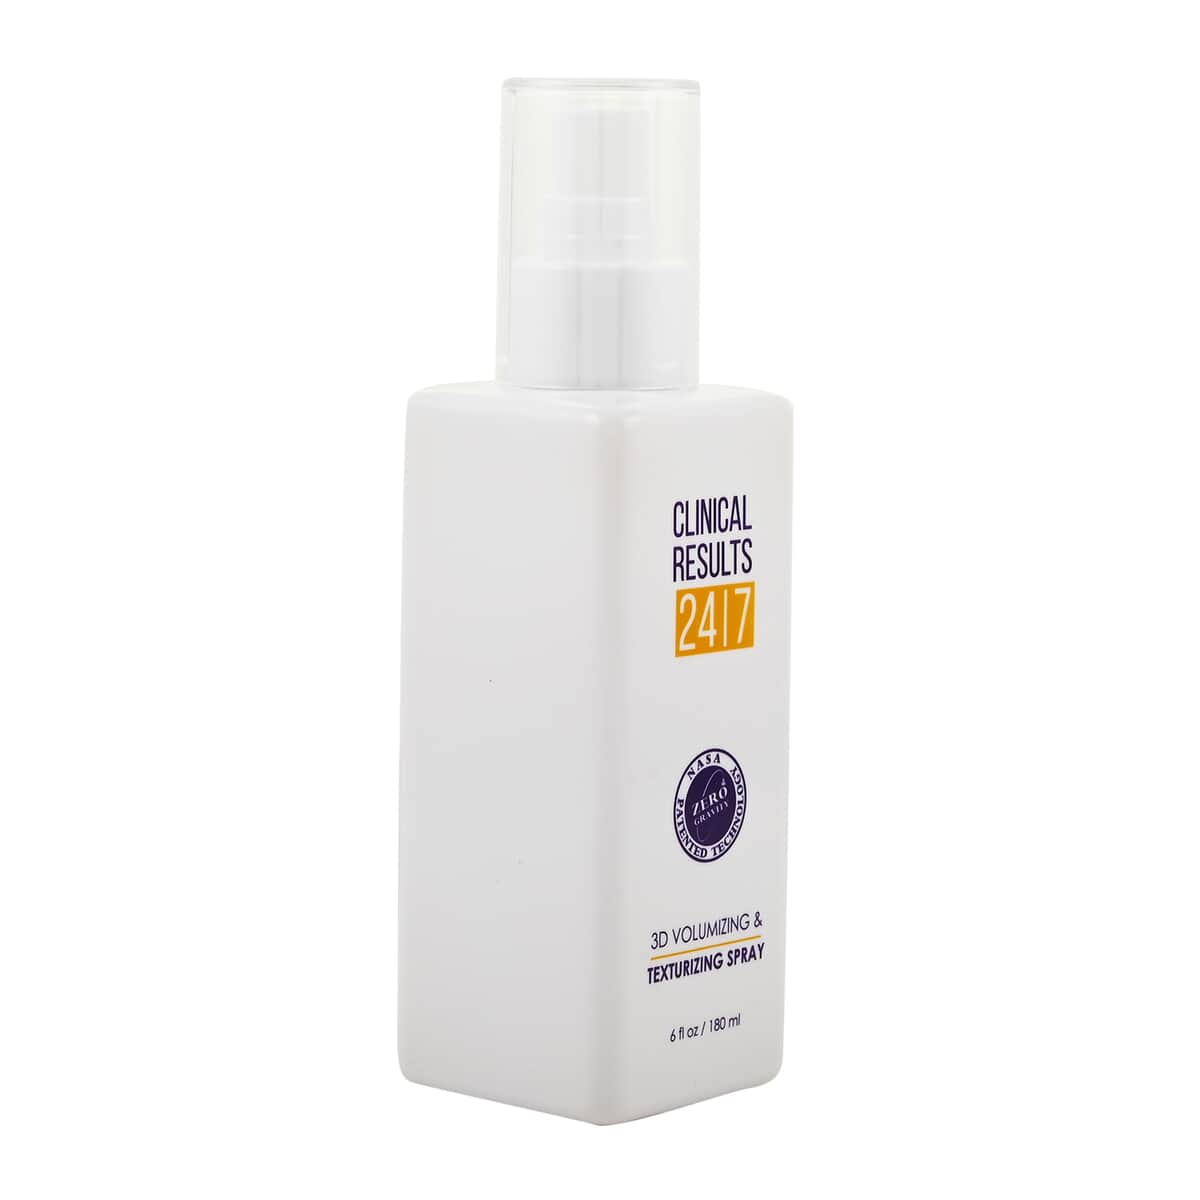 Clinical Results NASA 3D Volumizing & Texturizing Spray 6 oz (Made In USA) image number 4